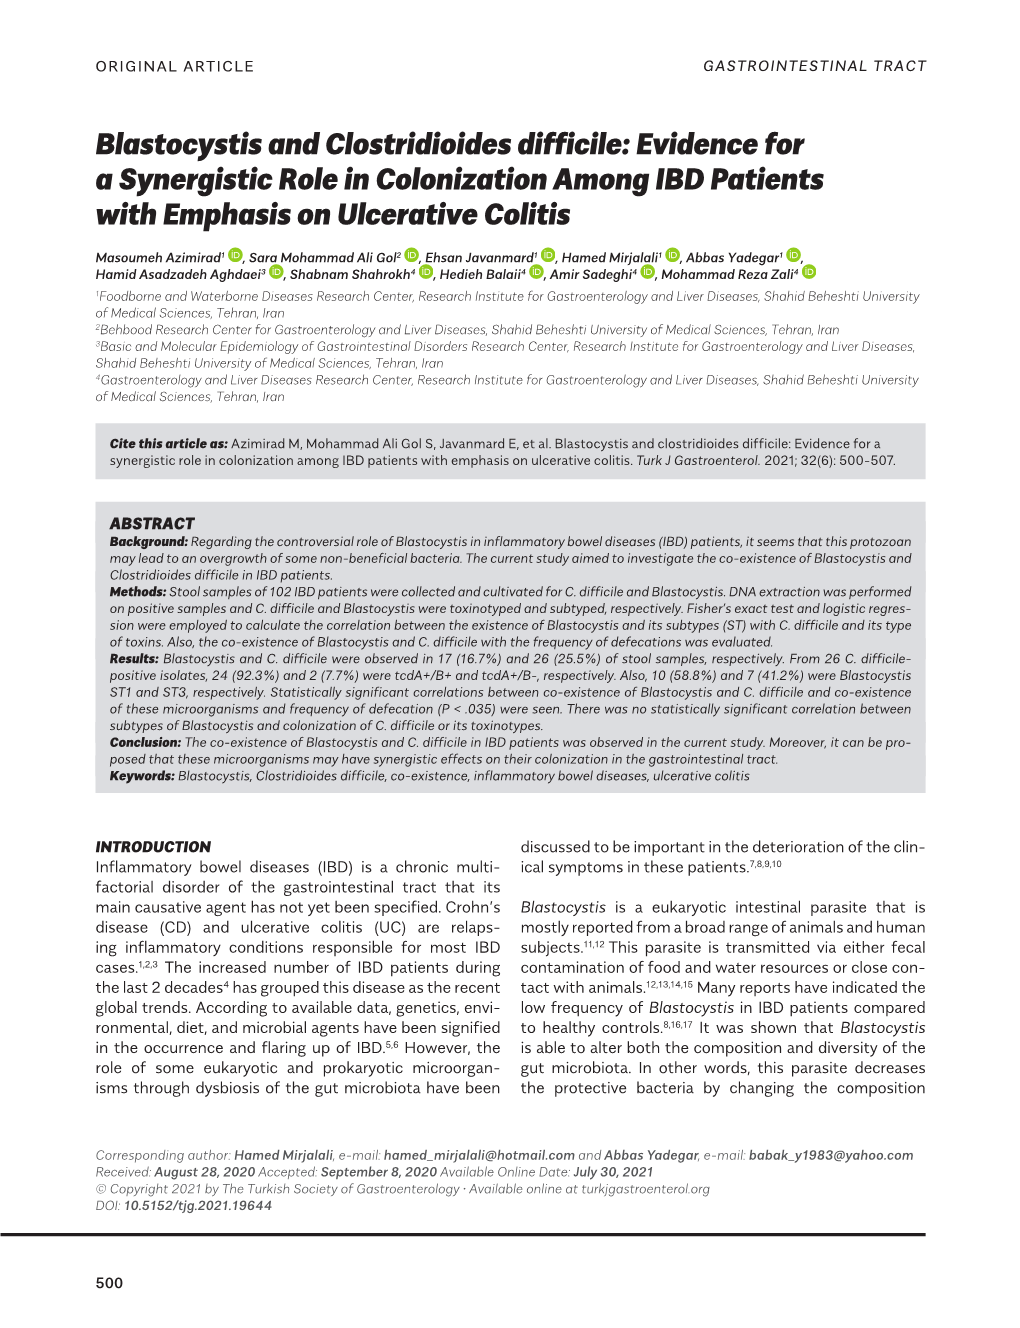 Blastocystis and Clostridioides Difficile in IBD Patients